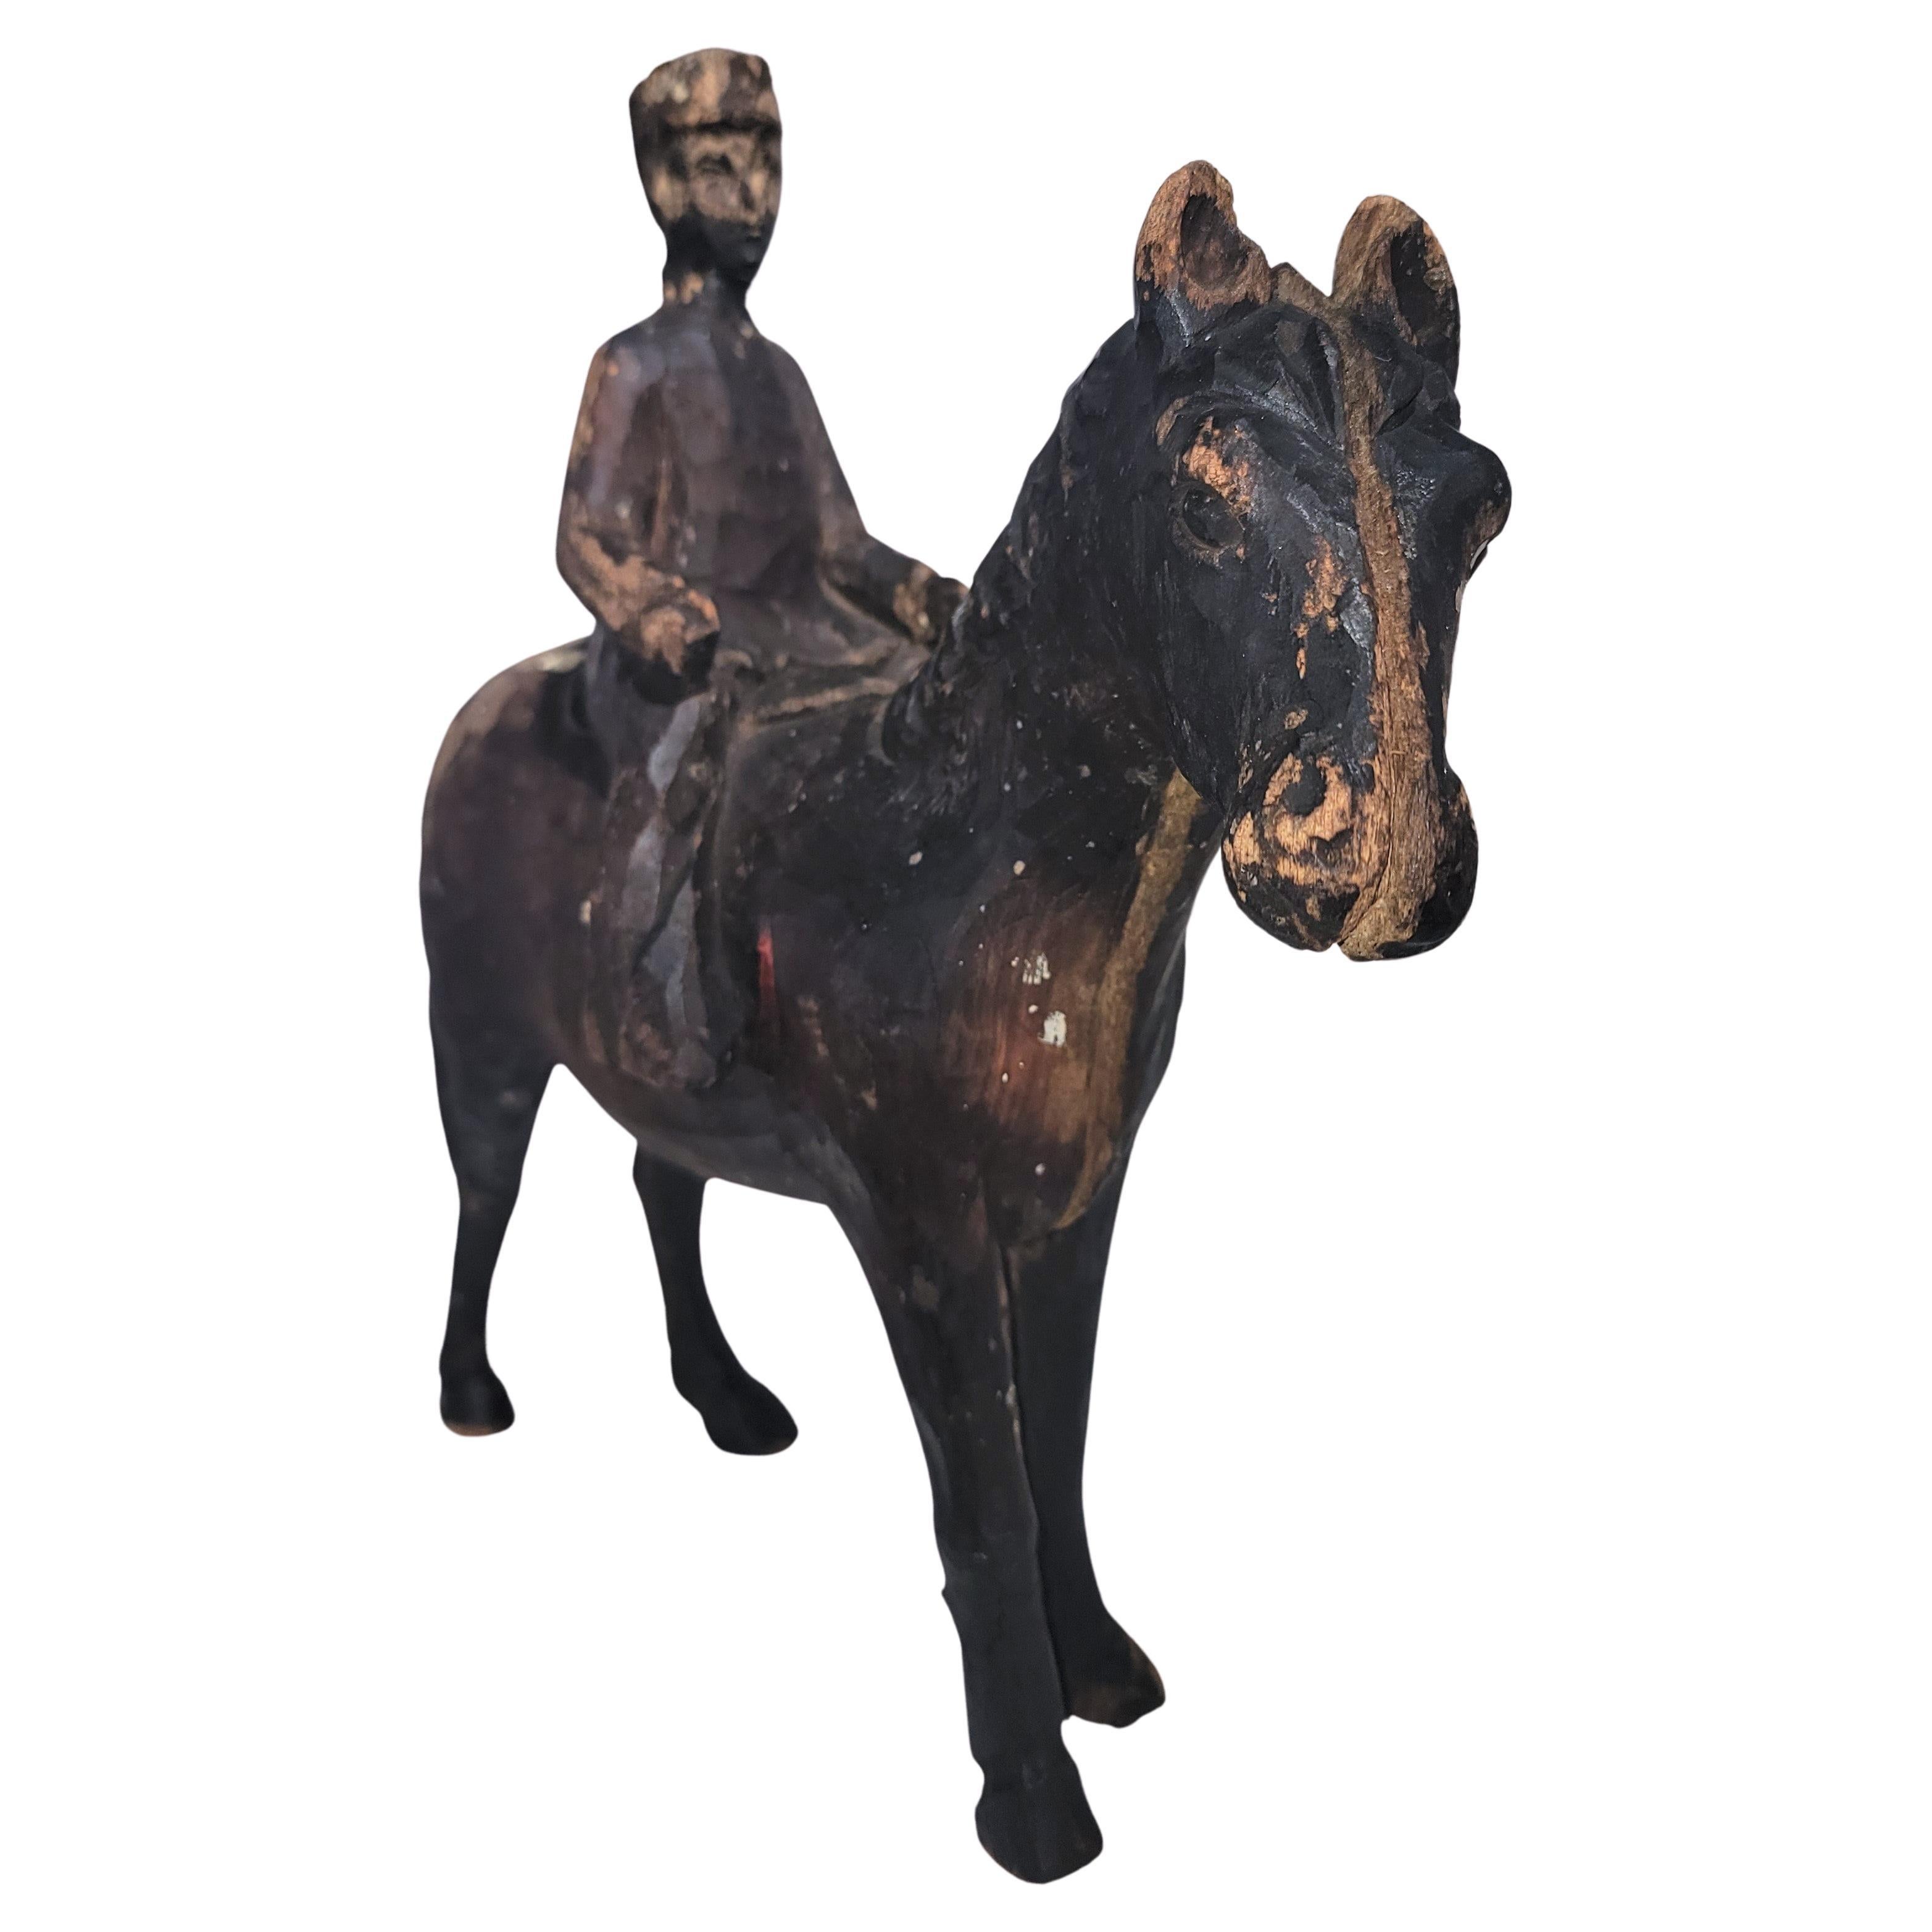 19Thc Hand carved horse and rider sculpture in amazing condition.This was found in a folk art collection in Arizona.The patina is wonderful and there are scrapes and wear consistent from age and use.